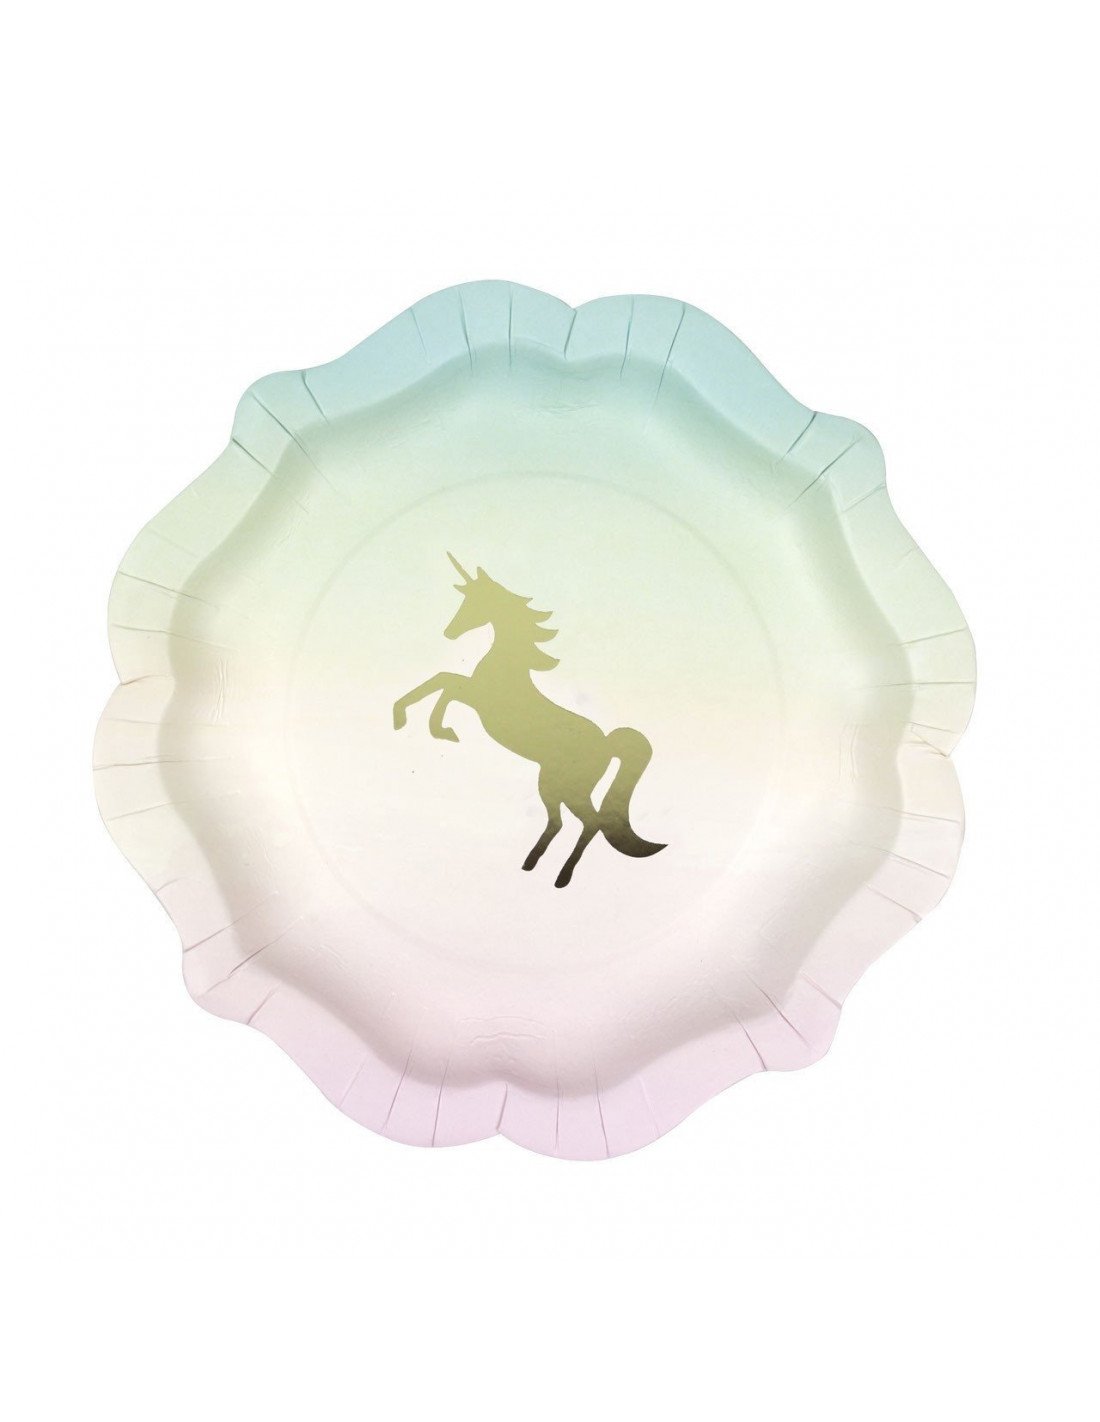 Cadre Gonflable Licorne pour Photobooth - Les Bambetises